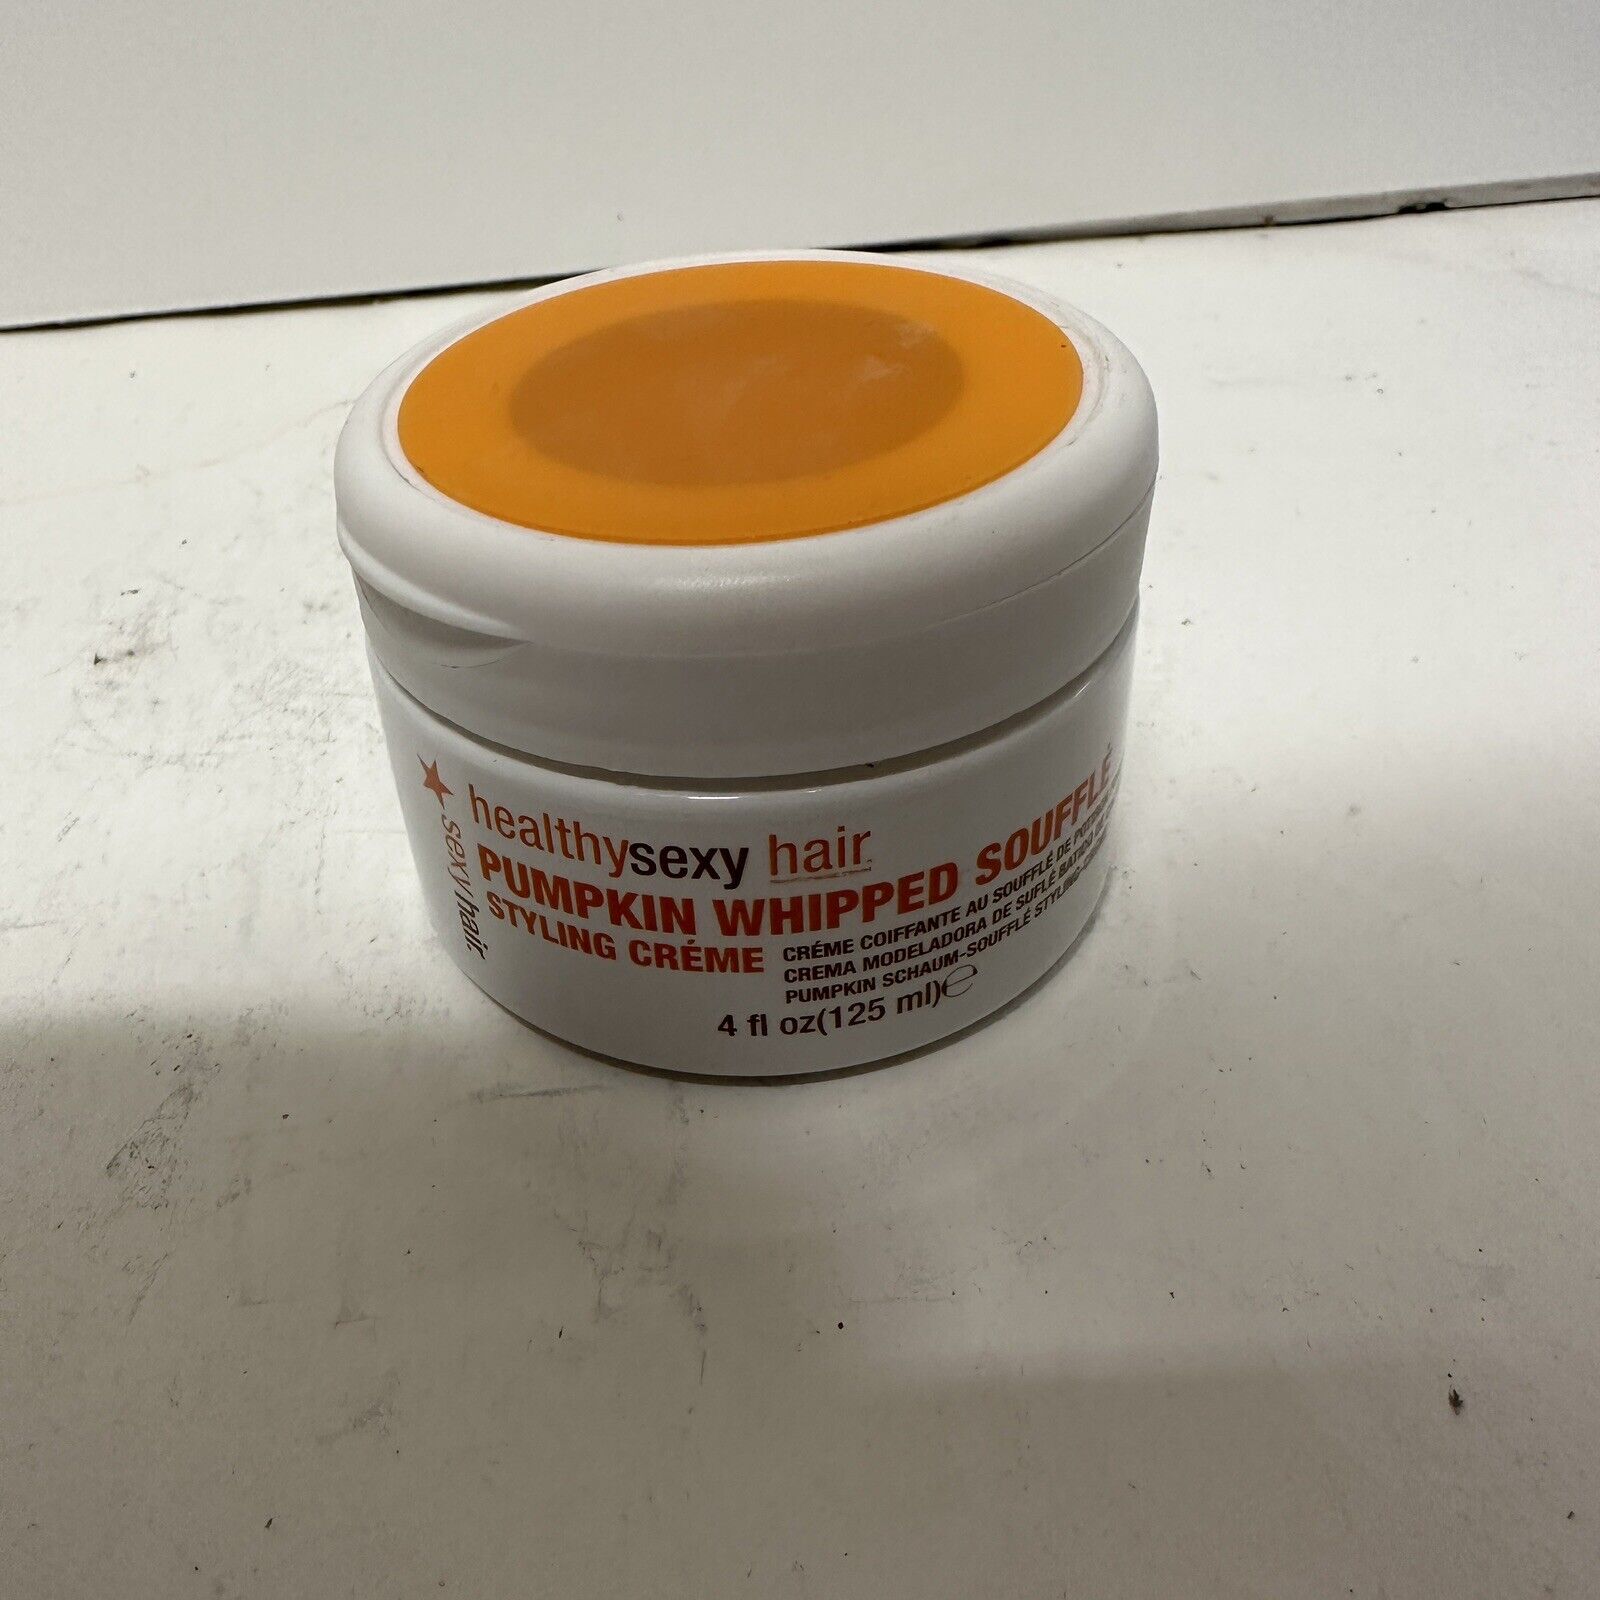 Healthy Sexy Hair Pumpkin Whipped Souffle Styling Creme 4 OZ HTF